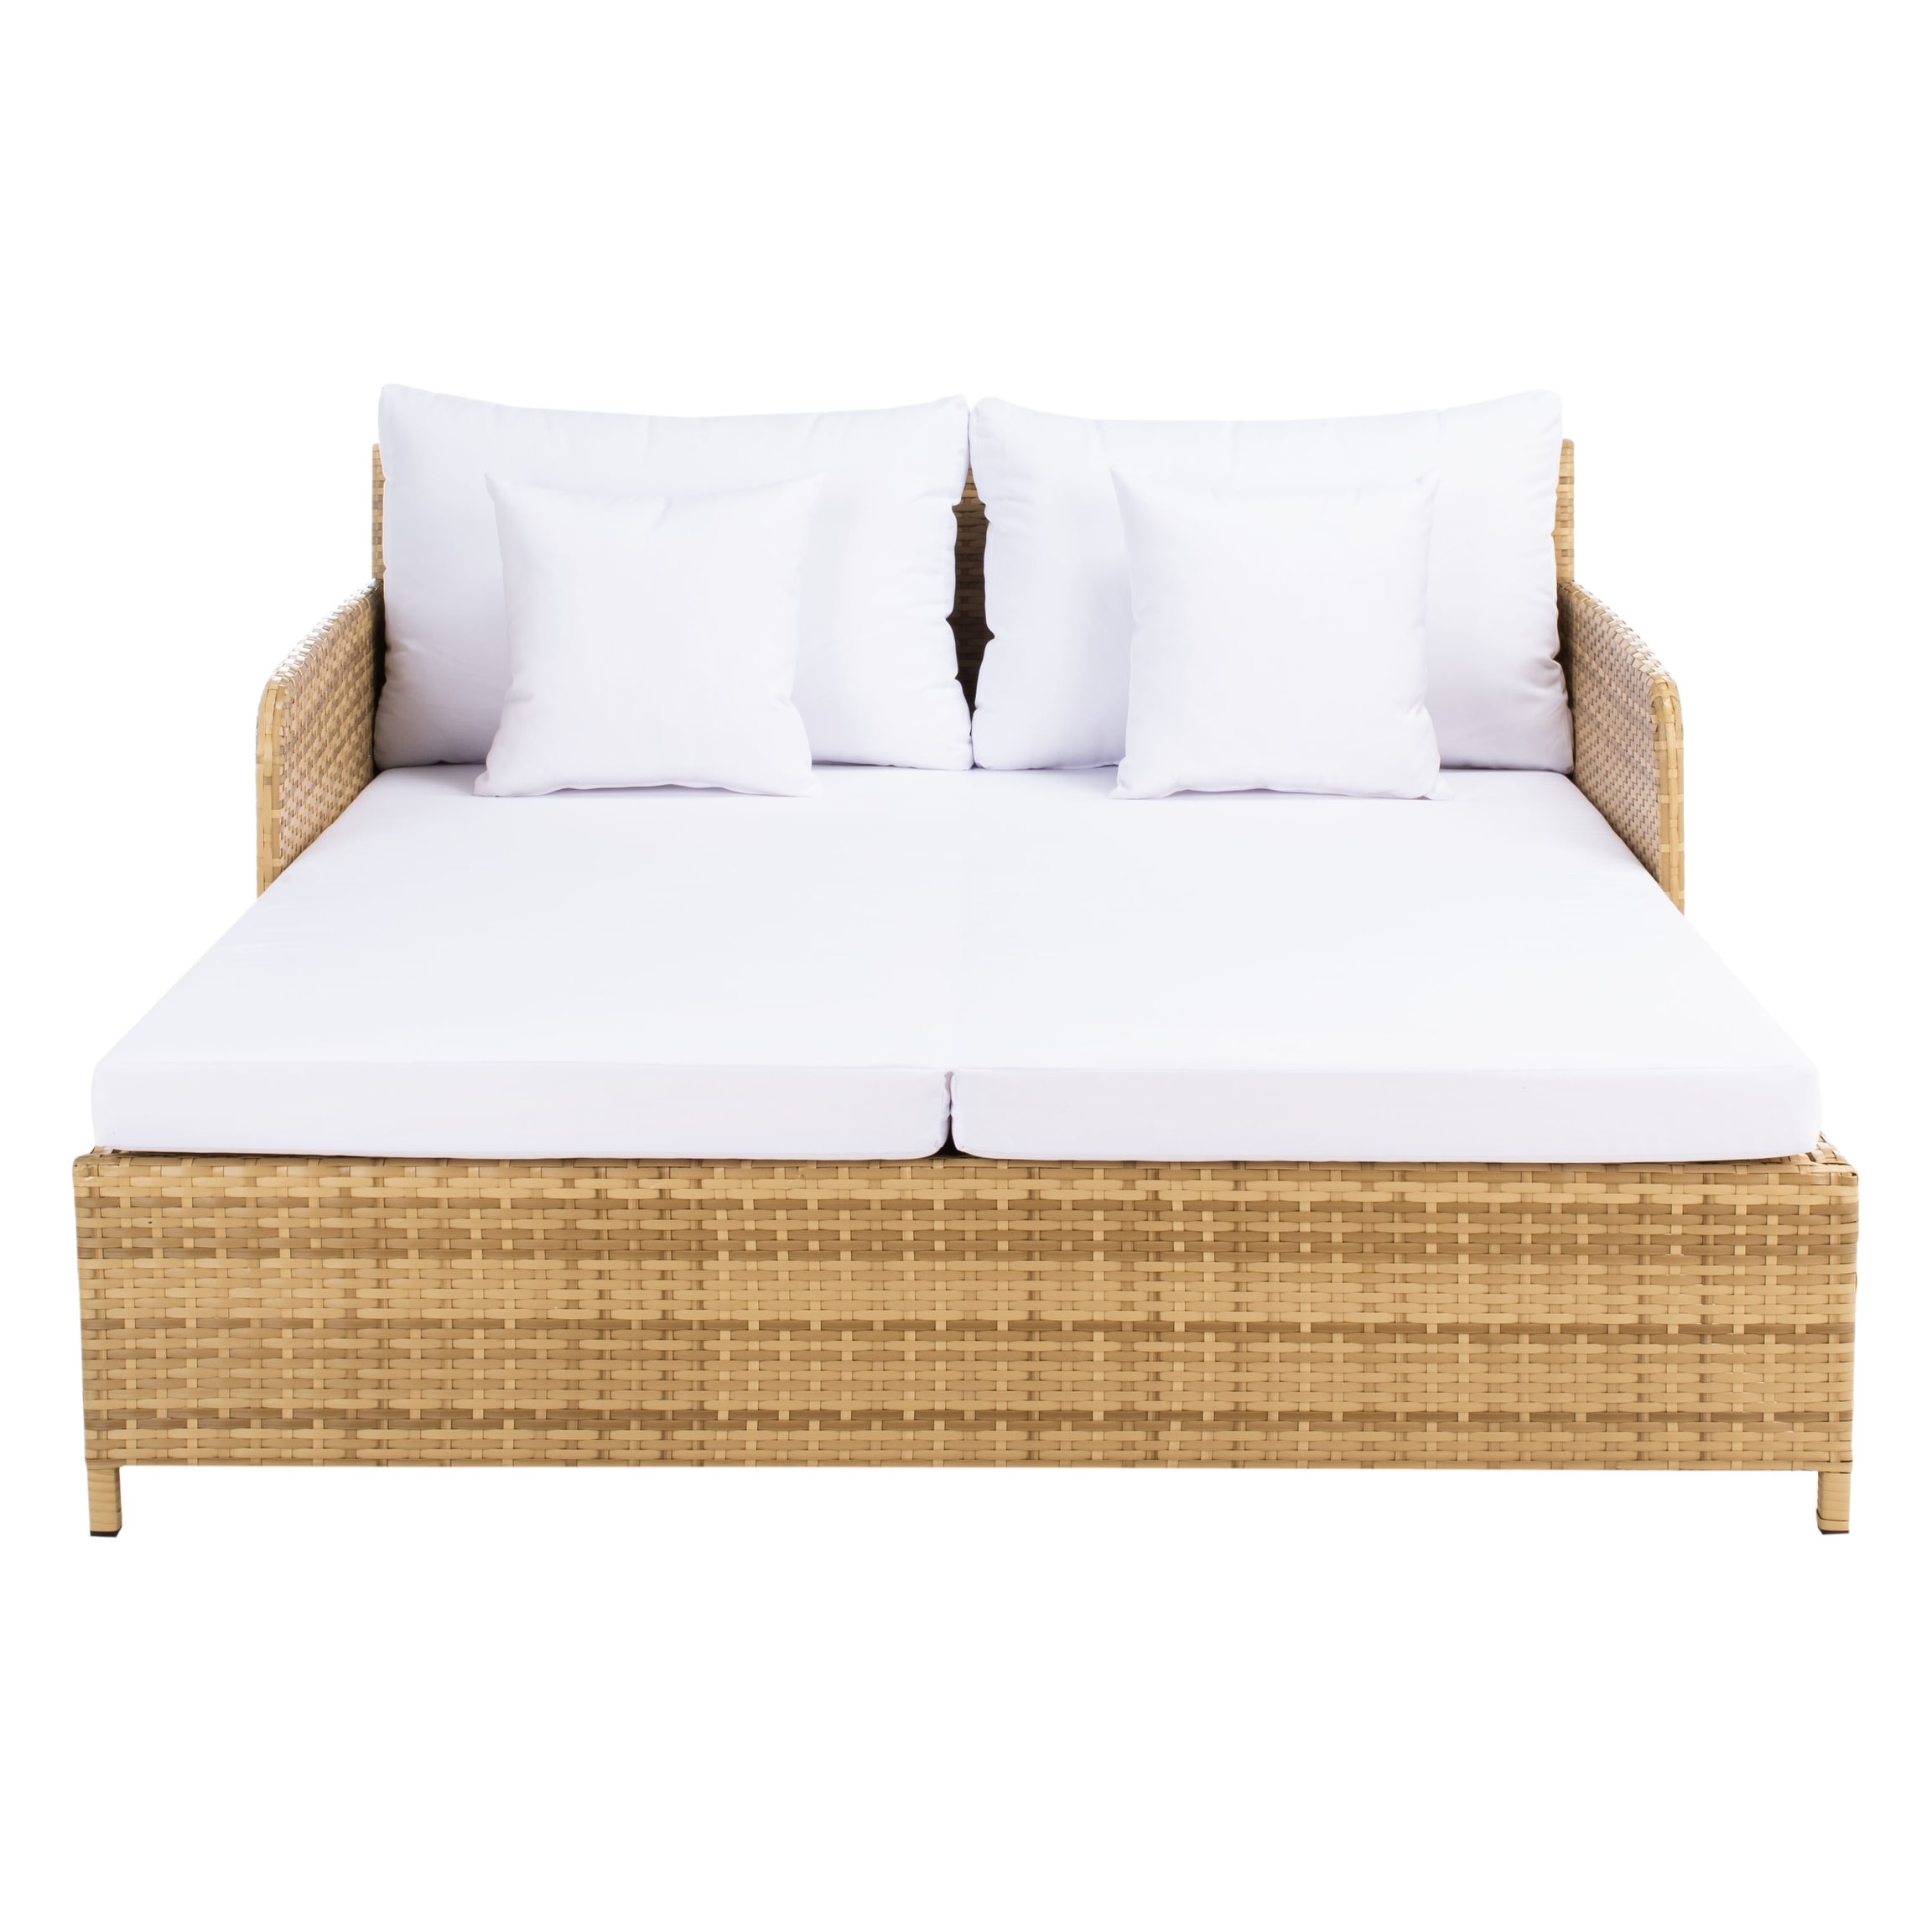 Safavieh Outdoor Cadeo Wicker Daybed With Pillows And Cushions